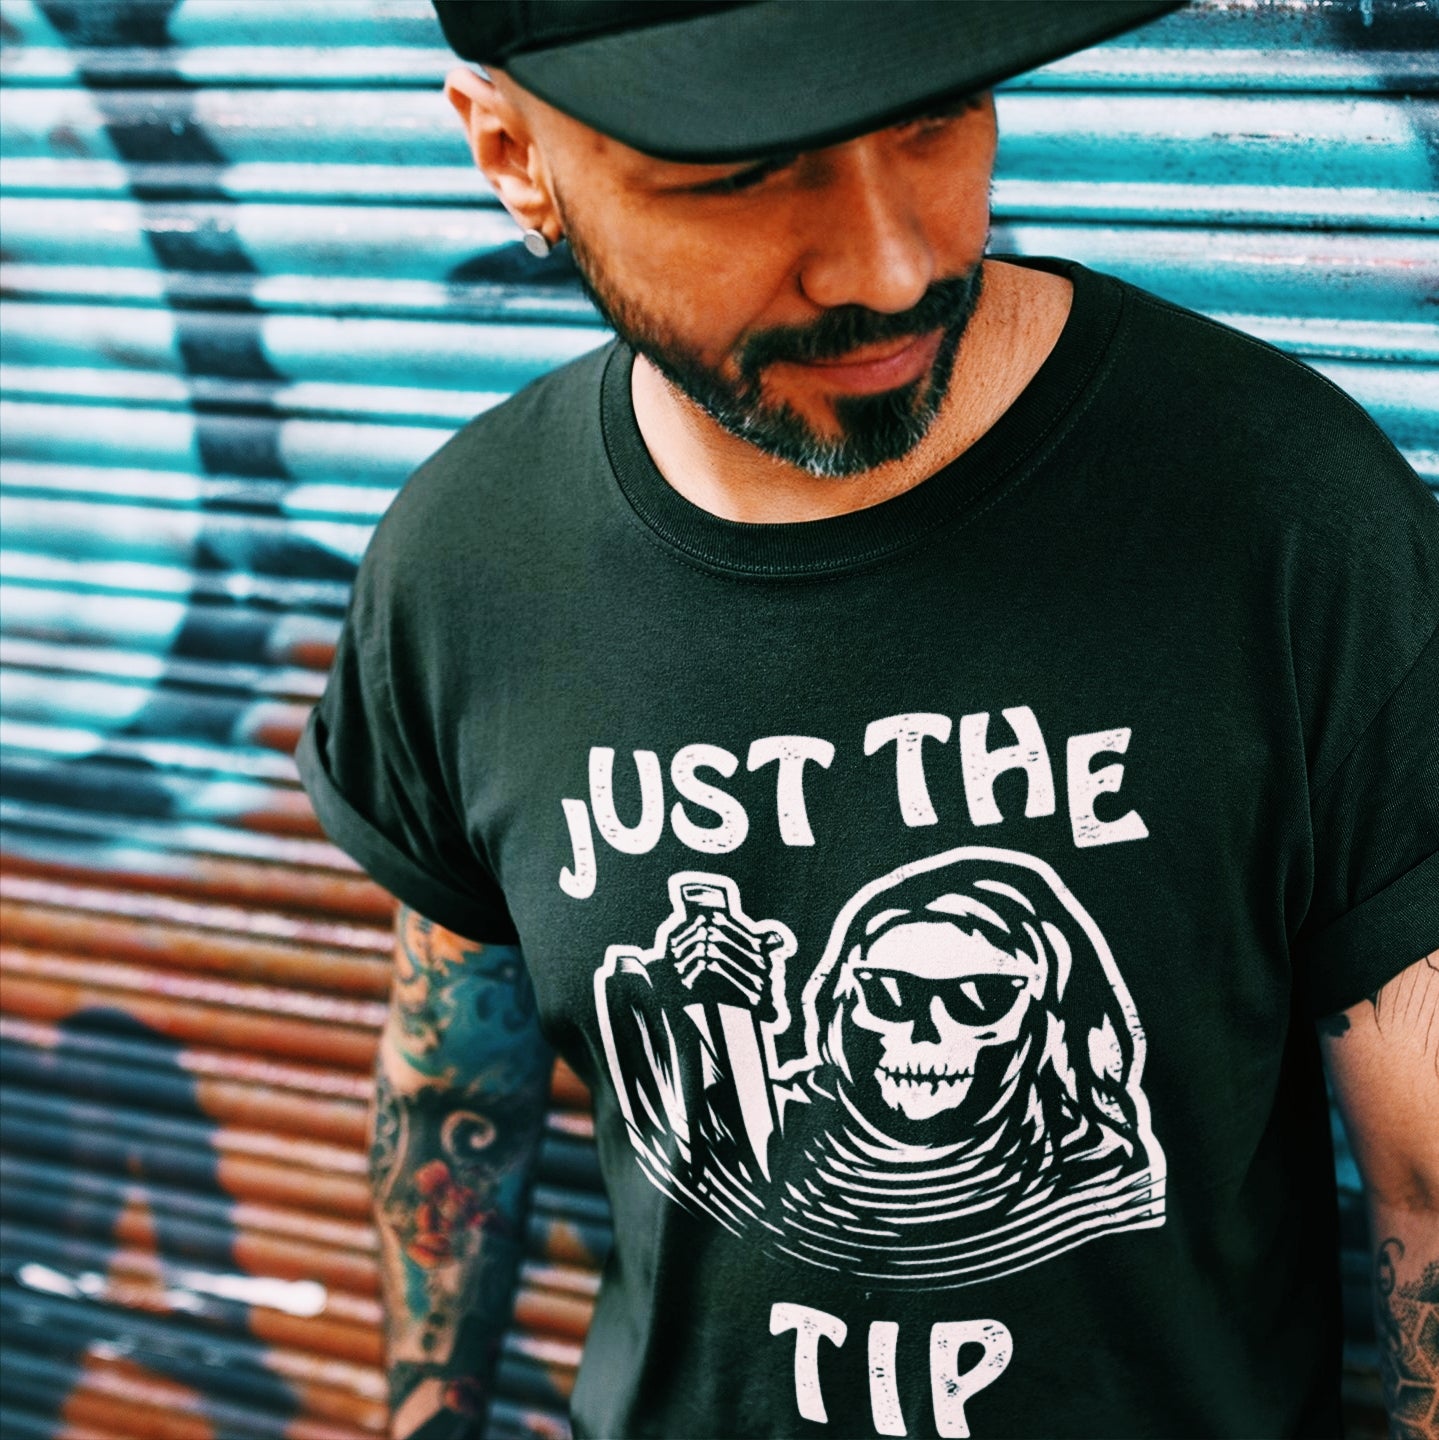 Mexican man wearing a funny black t-shirt for Latino men. The graphic is a humorous play on words. There is a tattoo-style skeleton holding a knife, and the words surrounding the image state "Just the Tip"